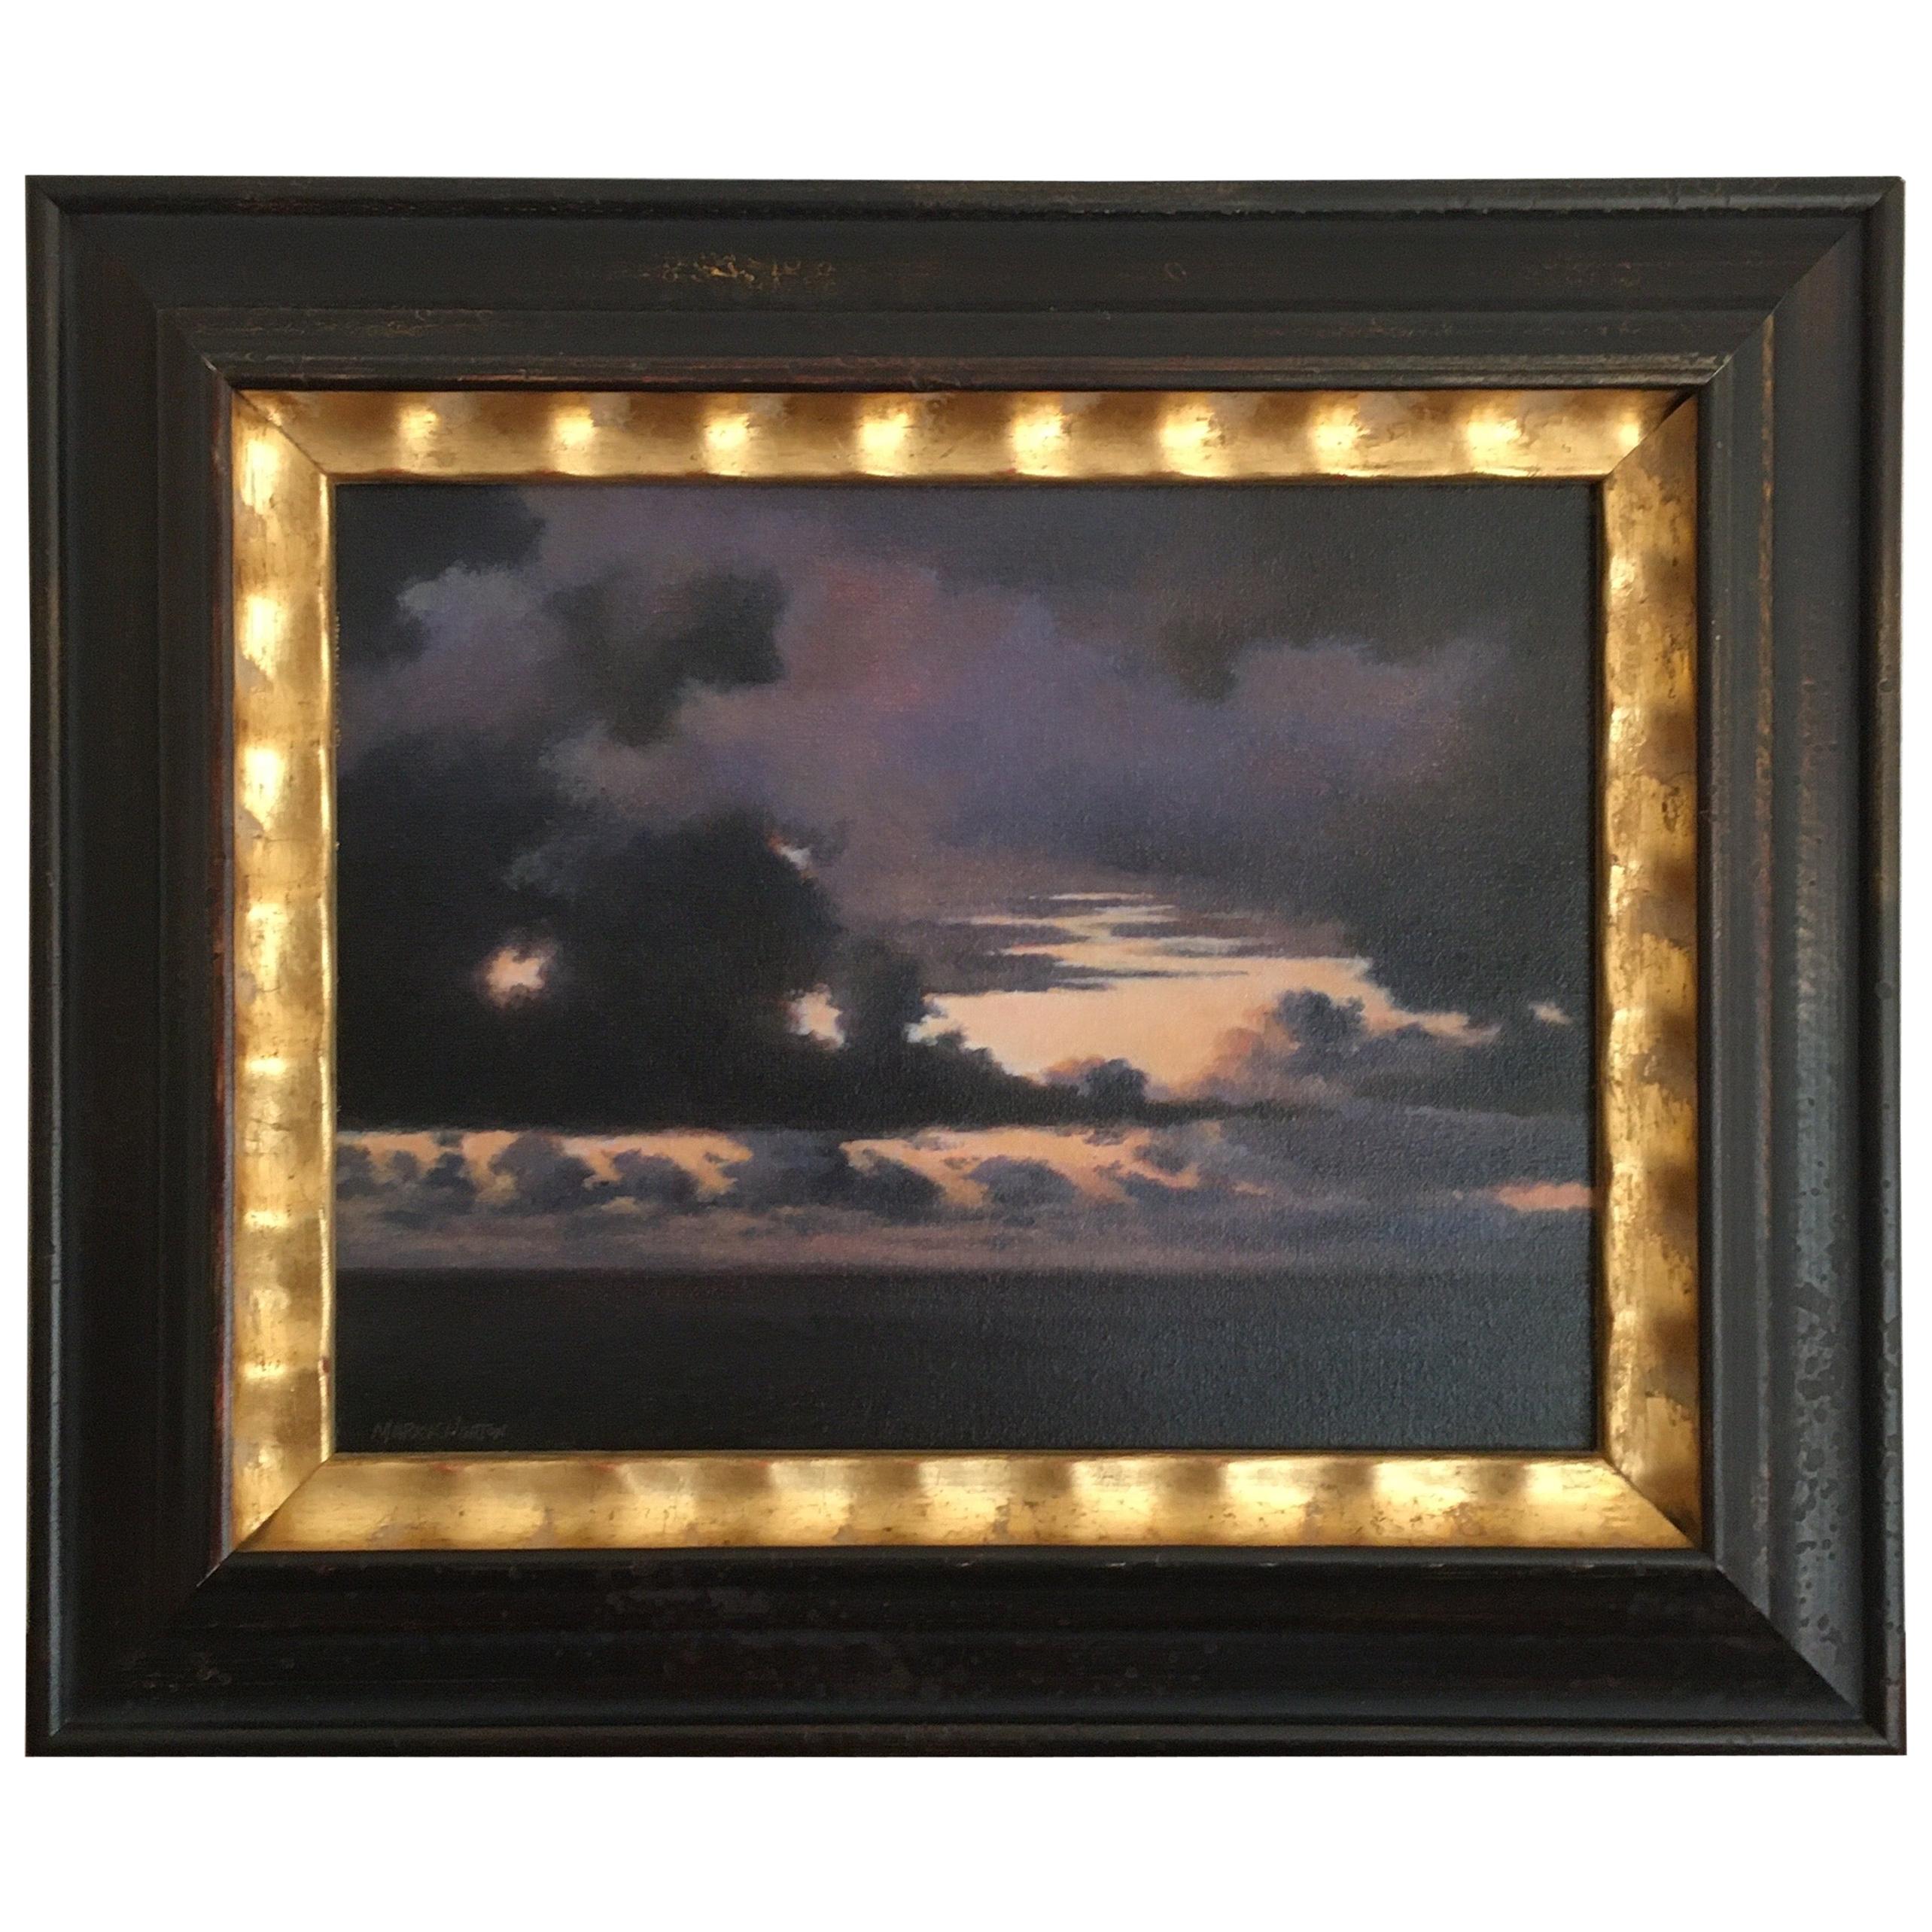 Oil on Canvas of a Storm by Mark K. Horton